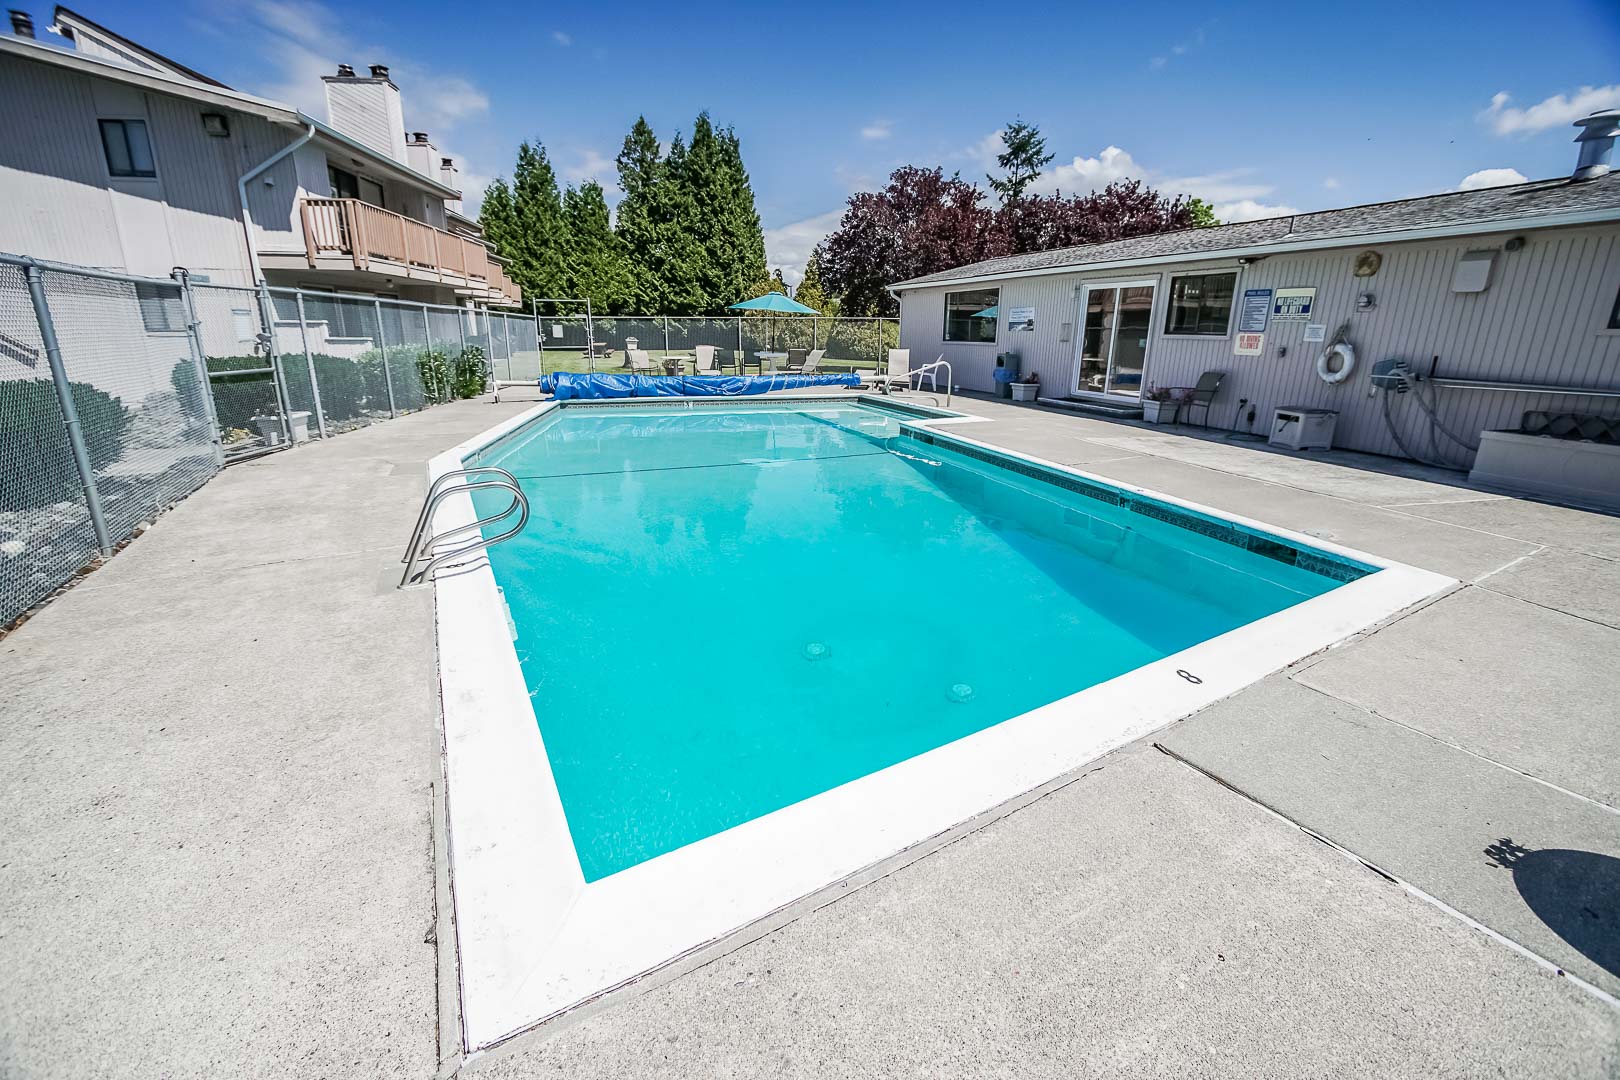 A clean outdoor swimming pool at VRI's Cabana Club in Blaine, Washington.